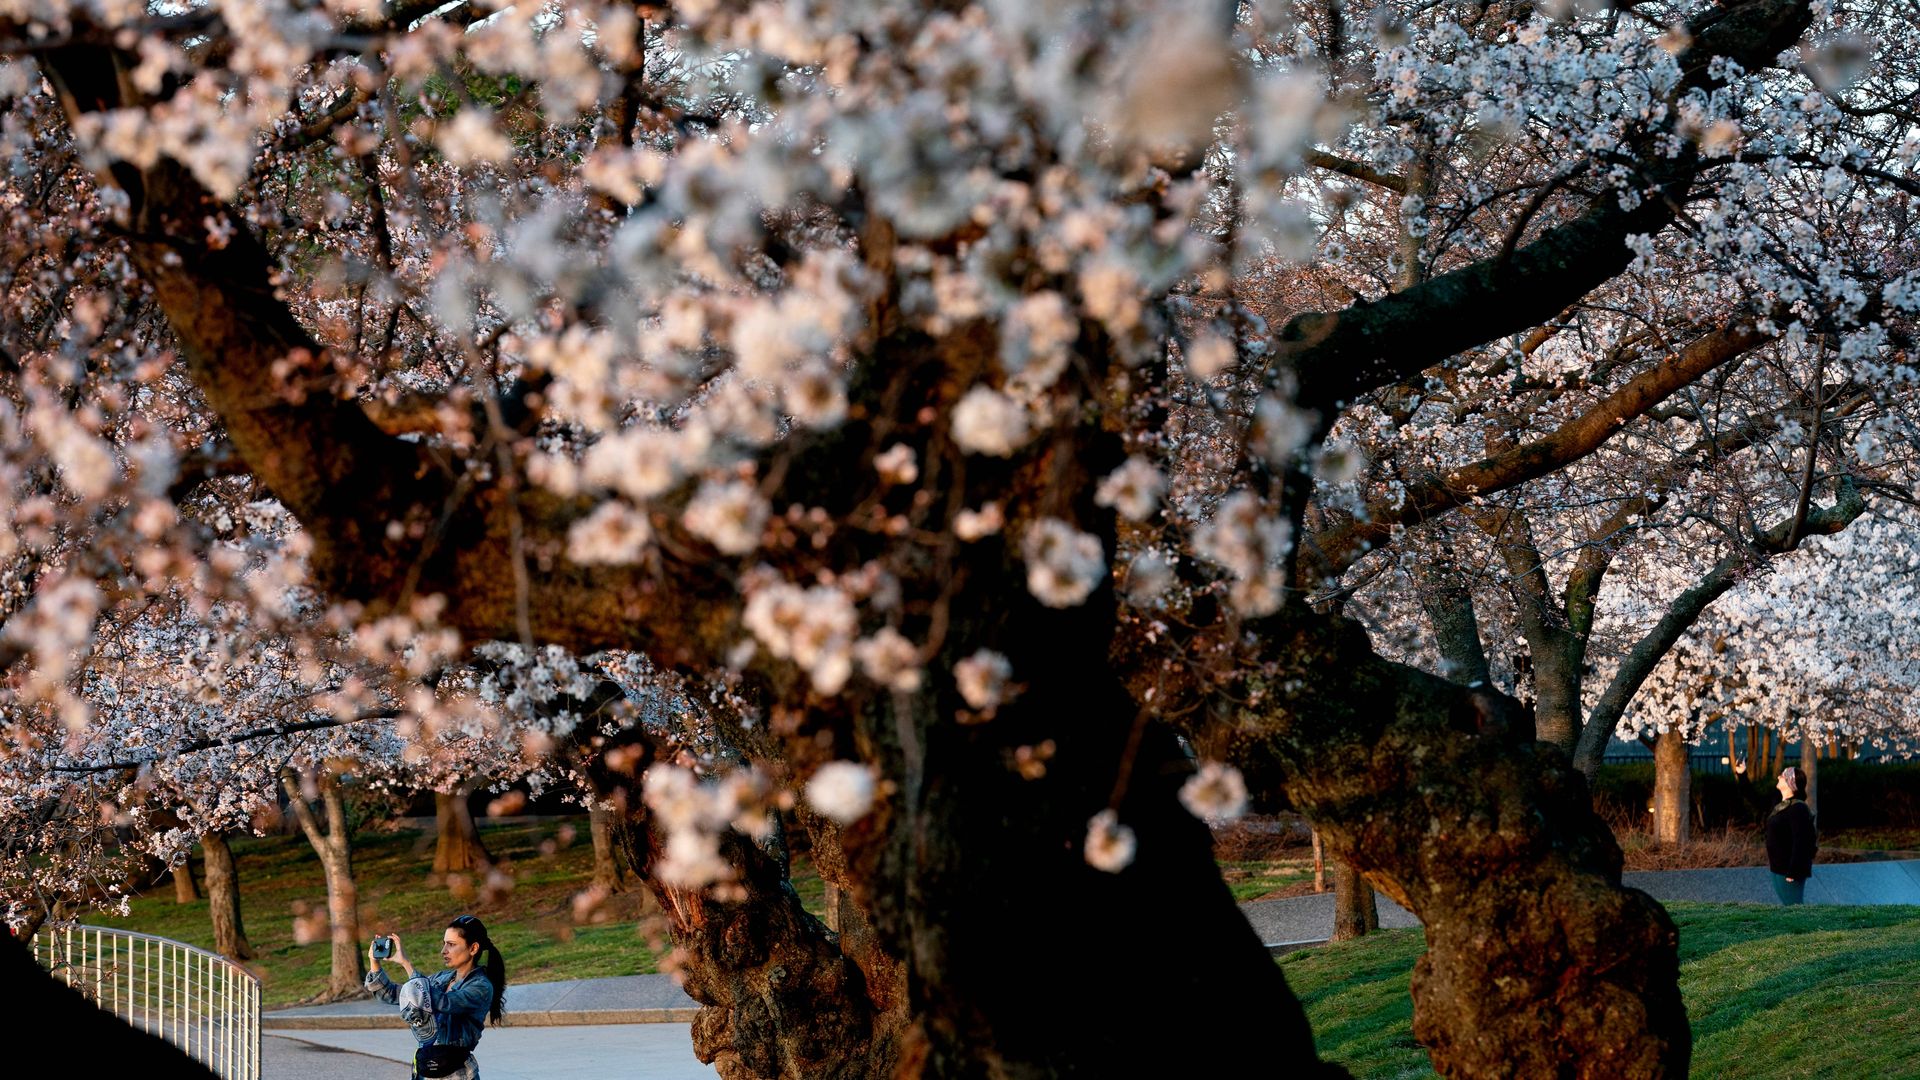 A jogger is seen snapping photos of Washington's cherry blossoms on Saturday.